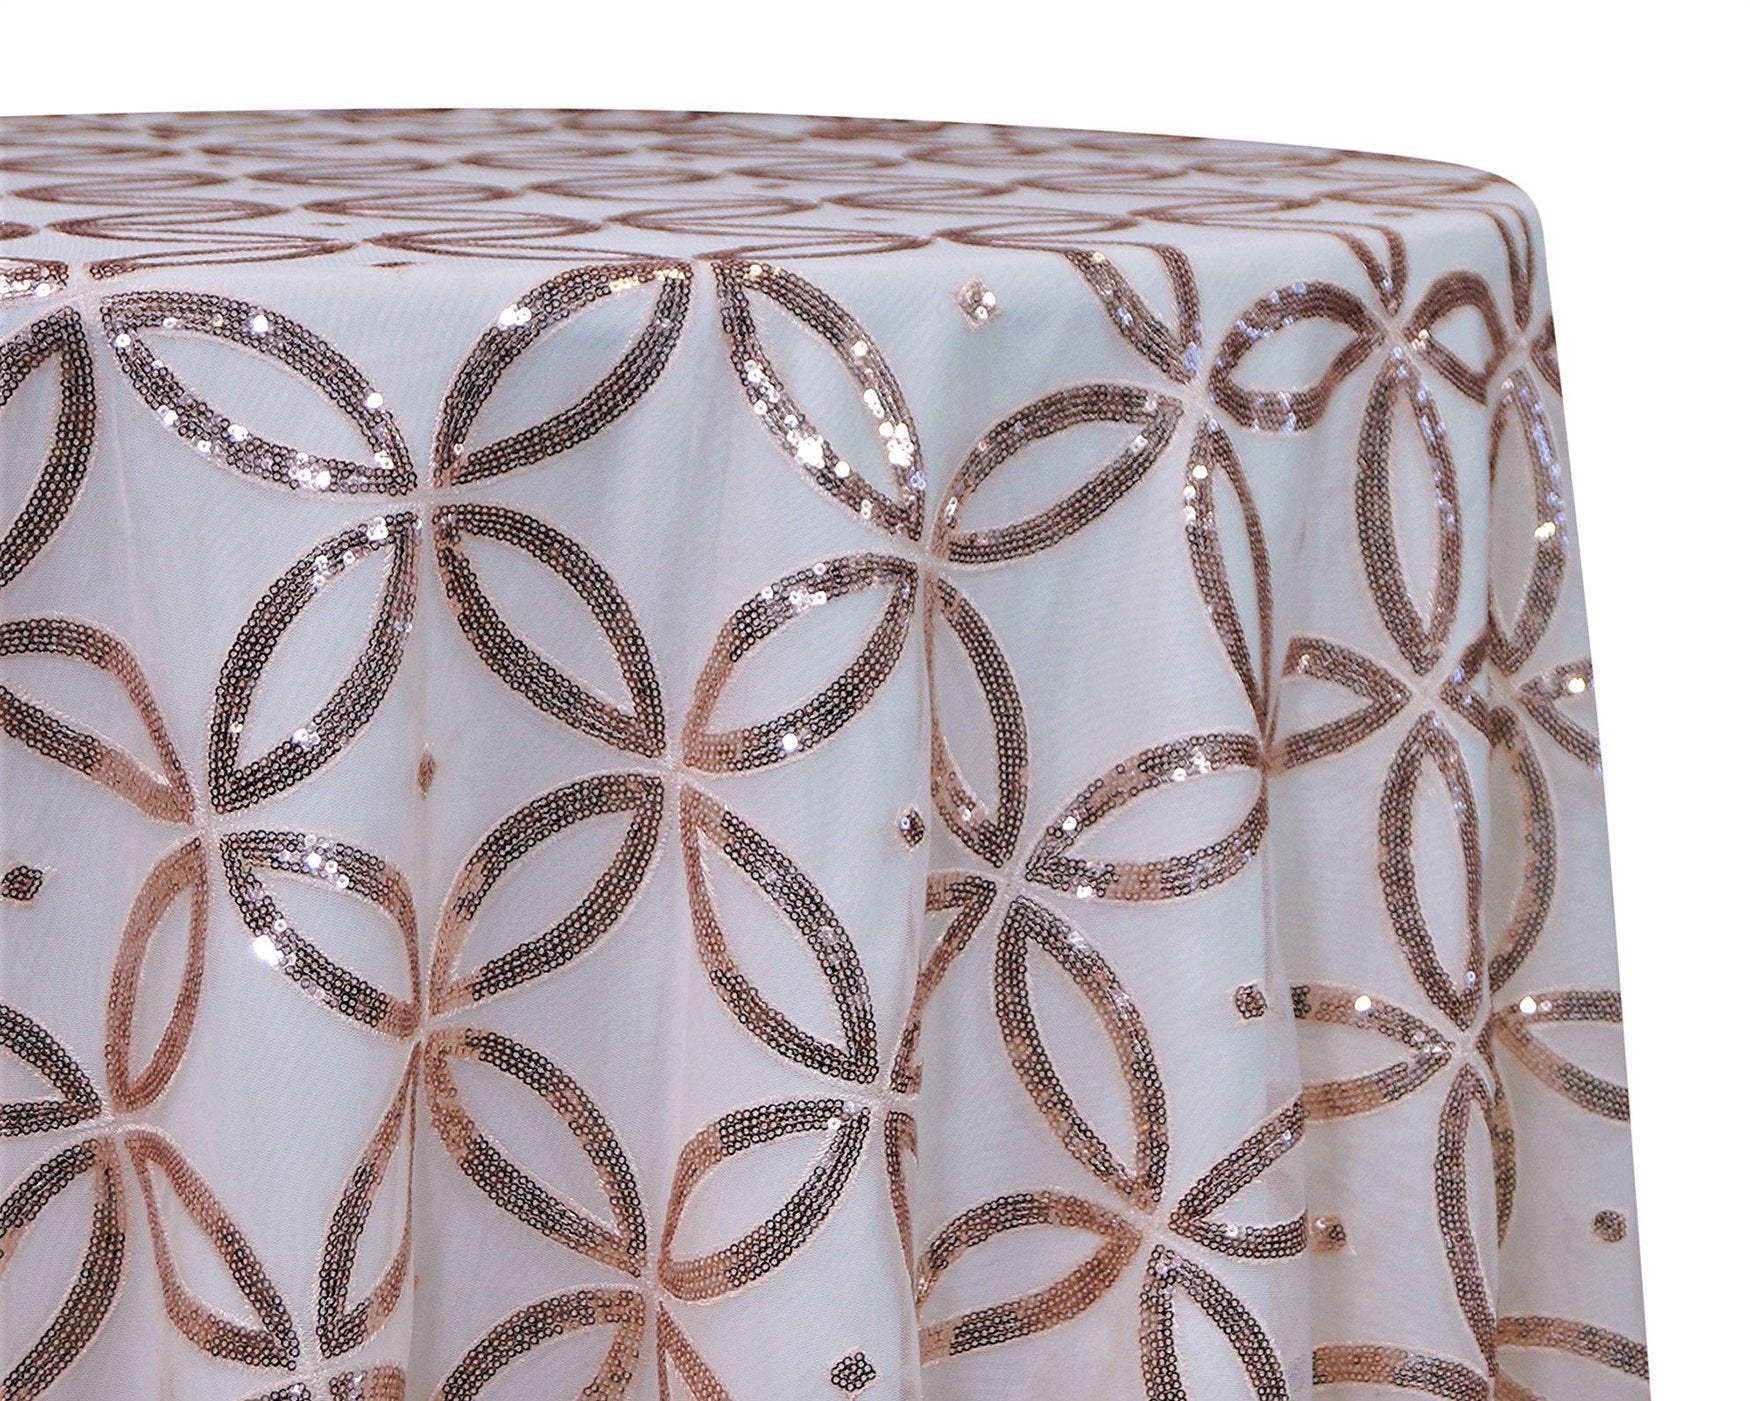 Sequin Patterned Tablecloth Rental